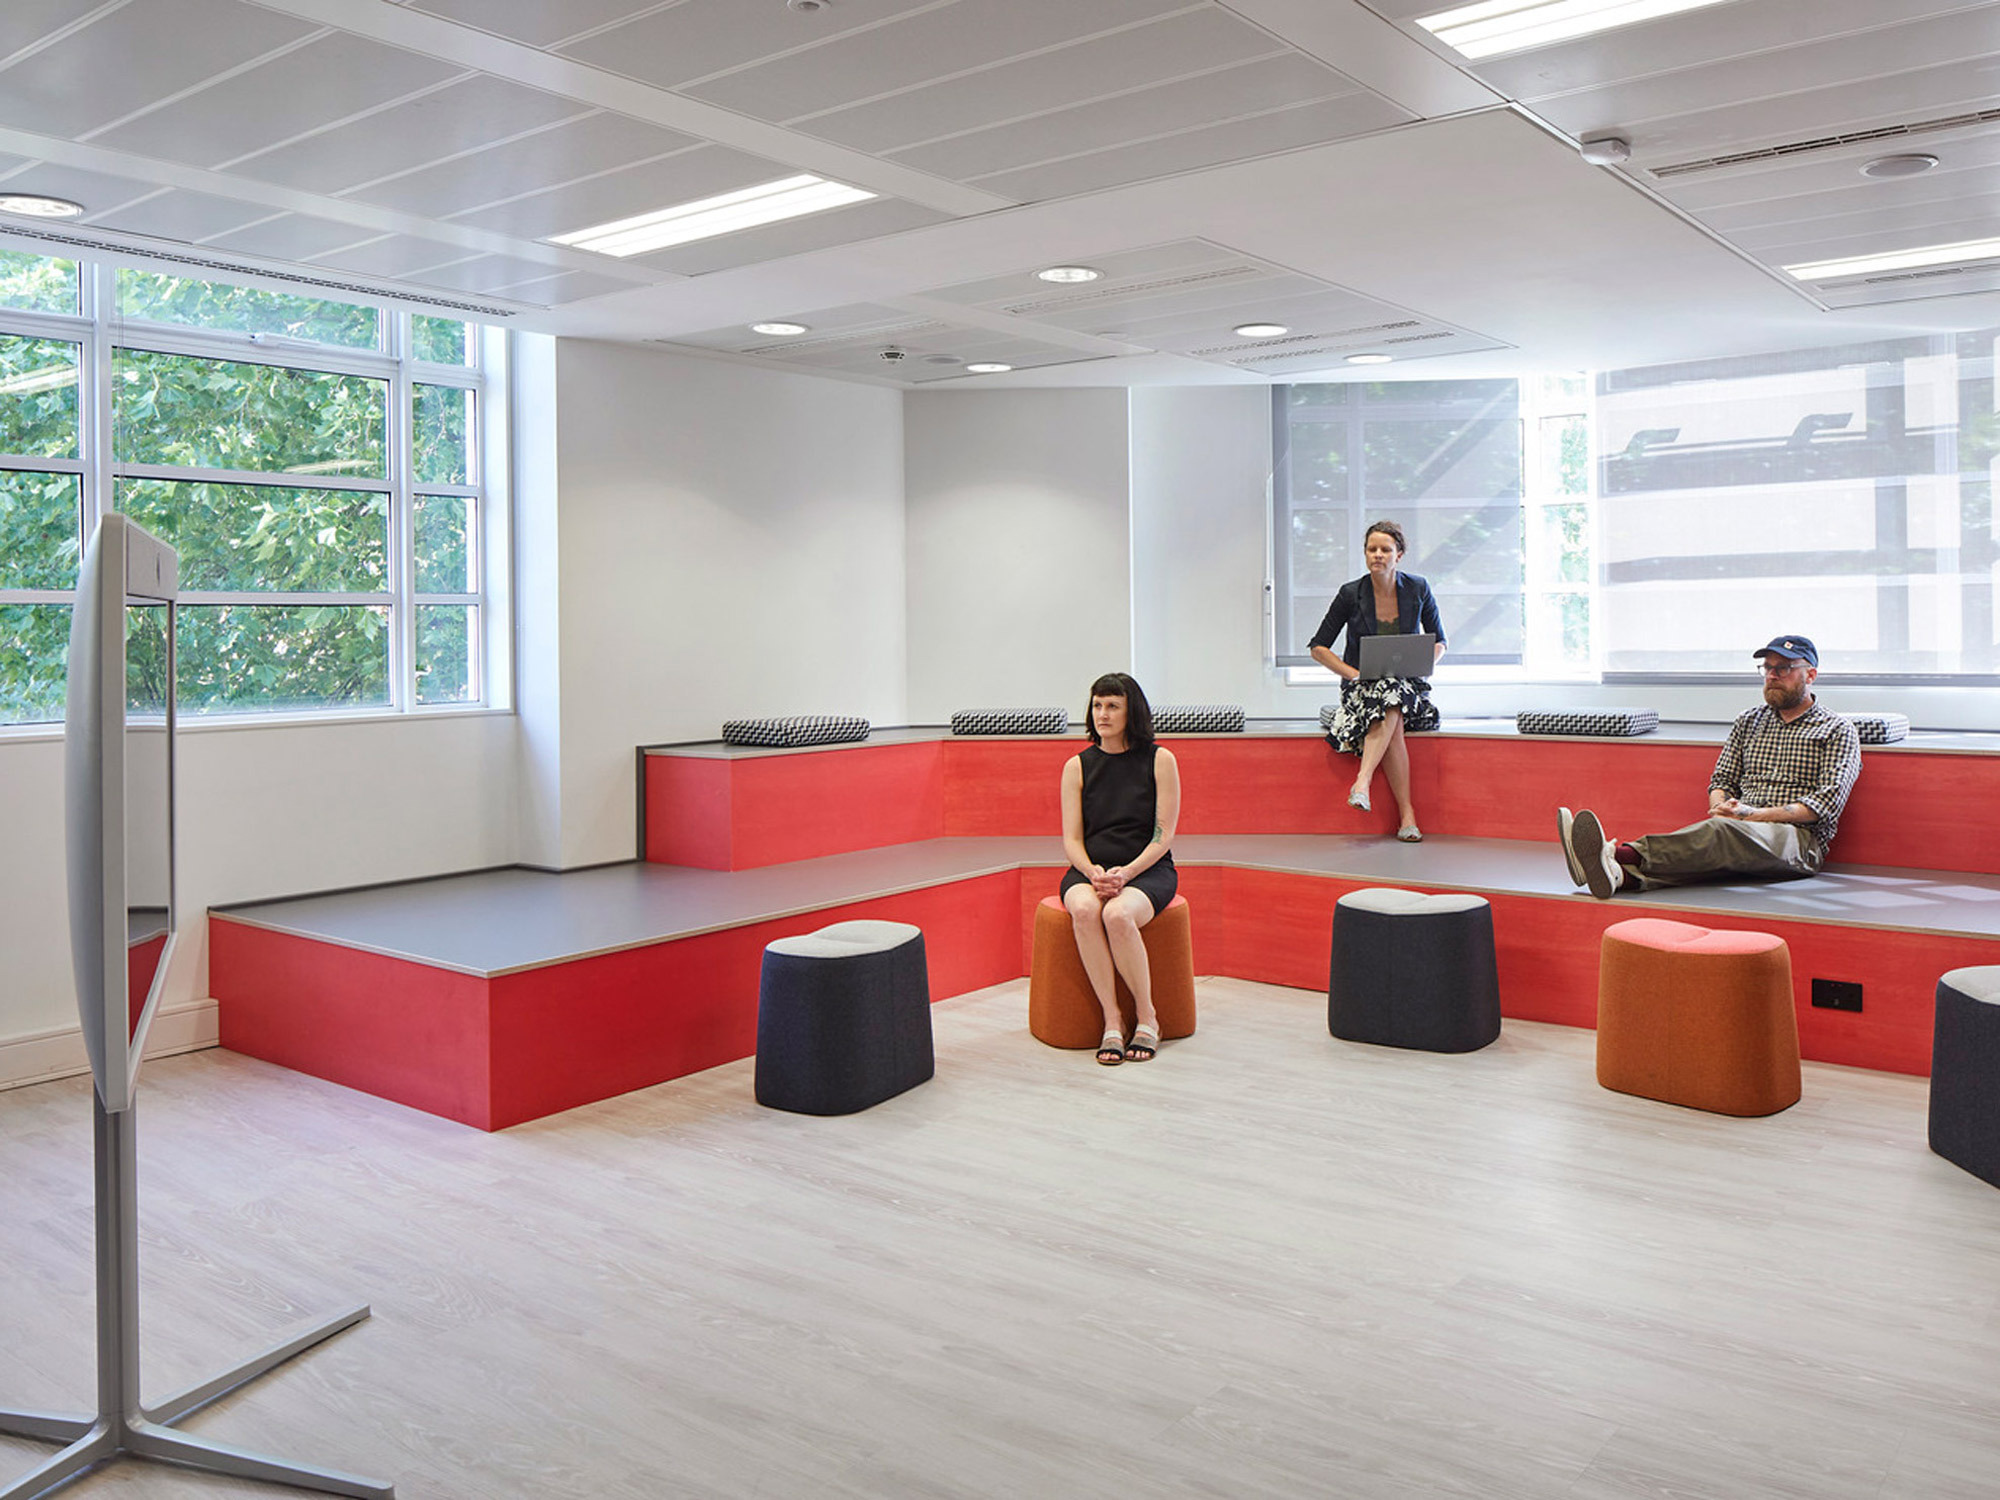 Modern open-concept workspace featuring tiered seating in bold red, gray cushioned accents, and movable brown poufs. Natural light filters through floor-to-ceiling windows complementing the minimalist decor and enhancing the versatility of the multipurpose area.